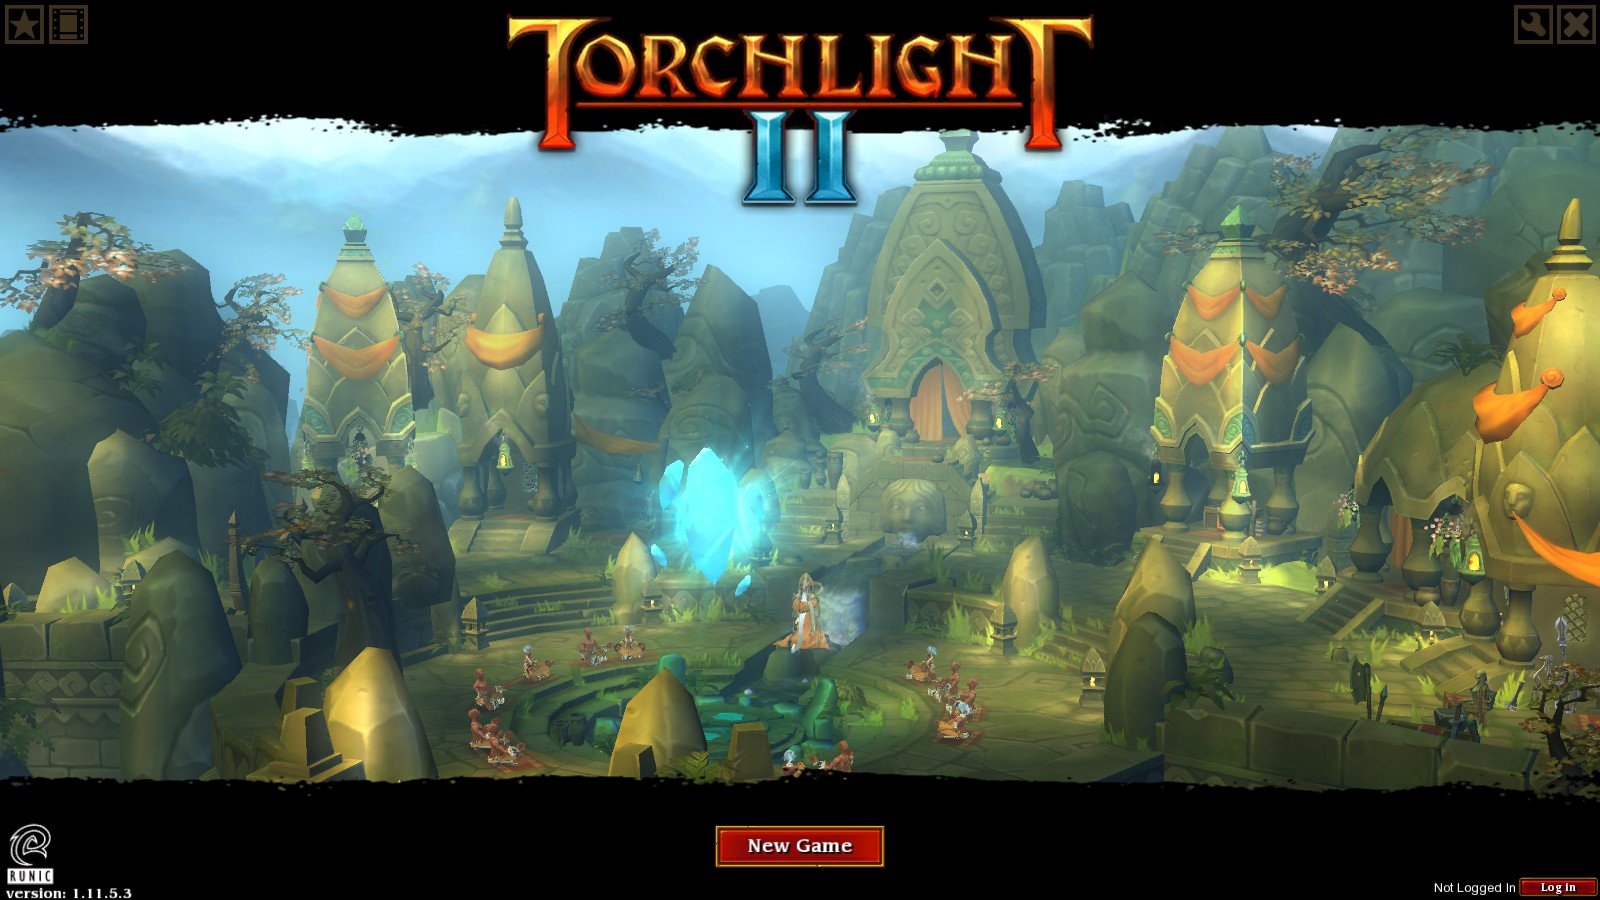 Runic Games Announces Torchlight II Coming to Mac Feb. 2nd with Fun Video